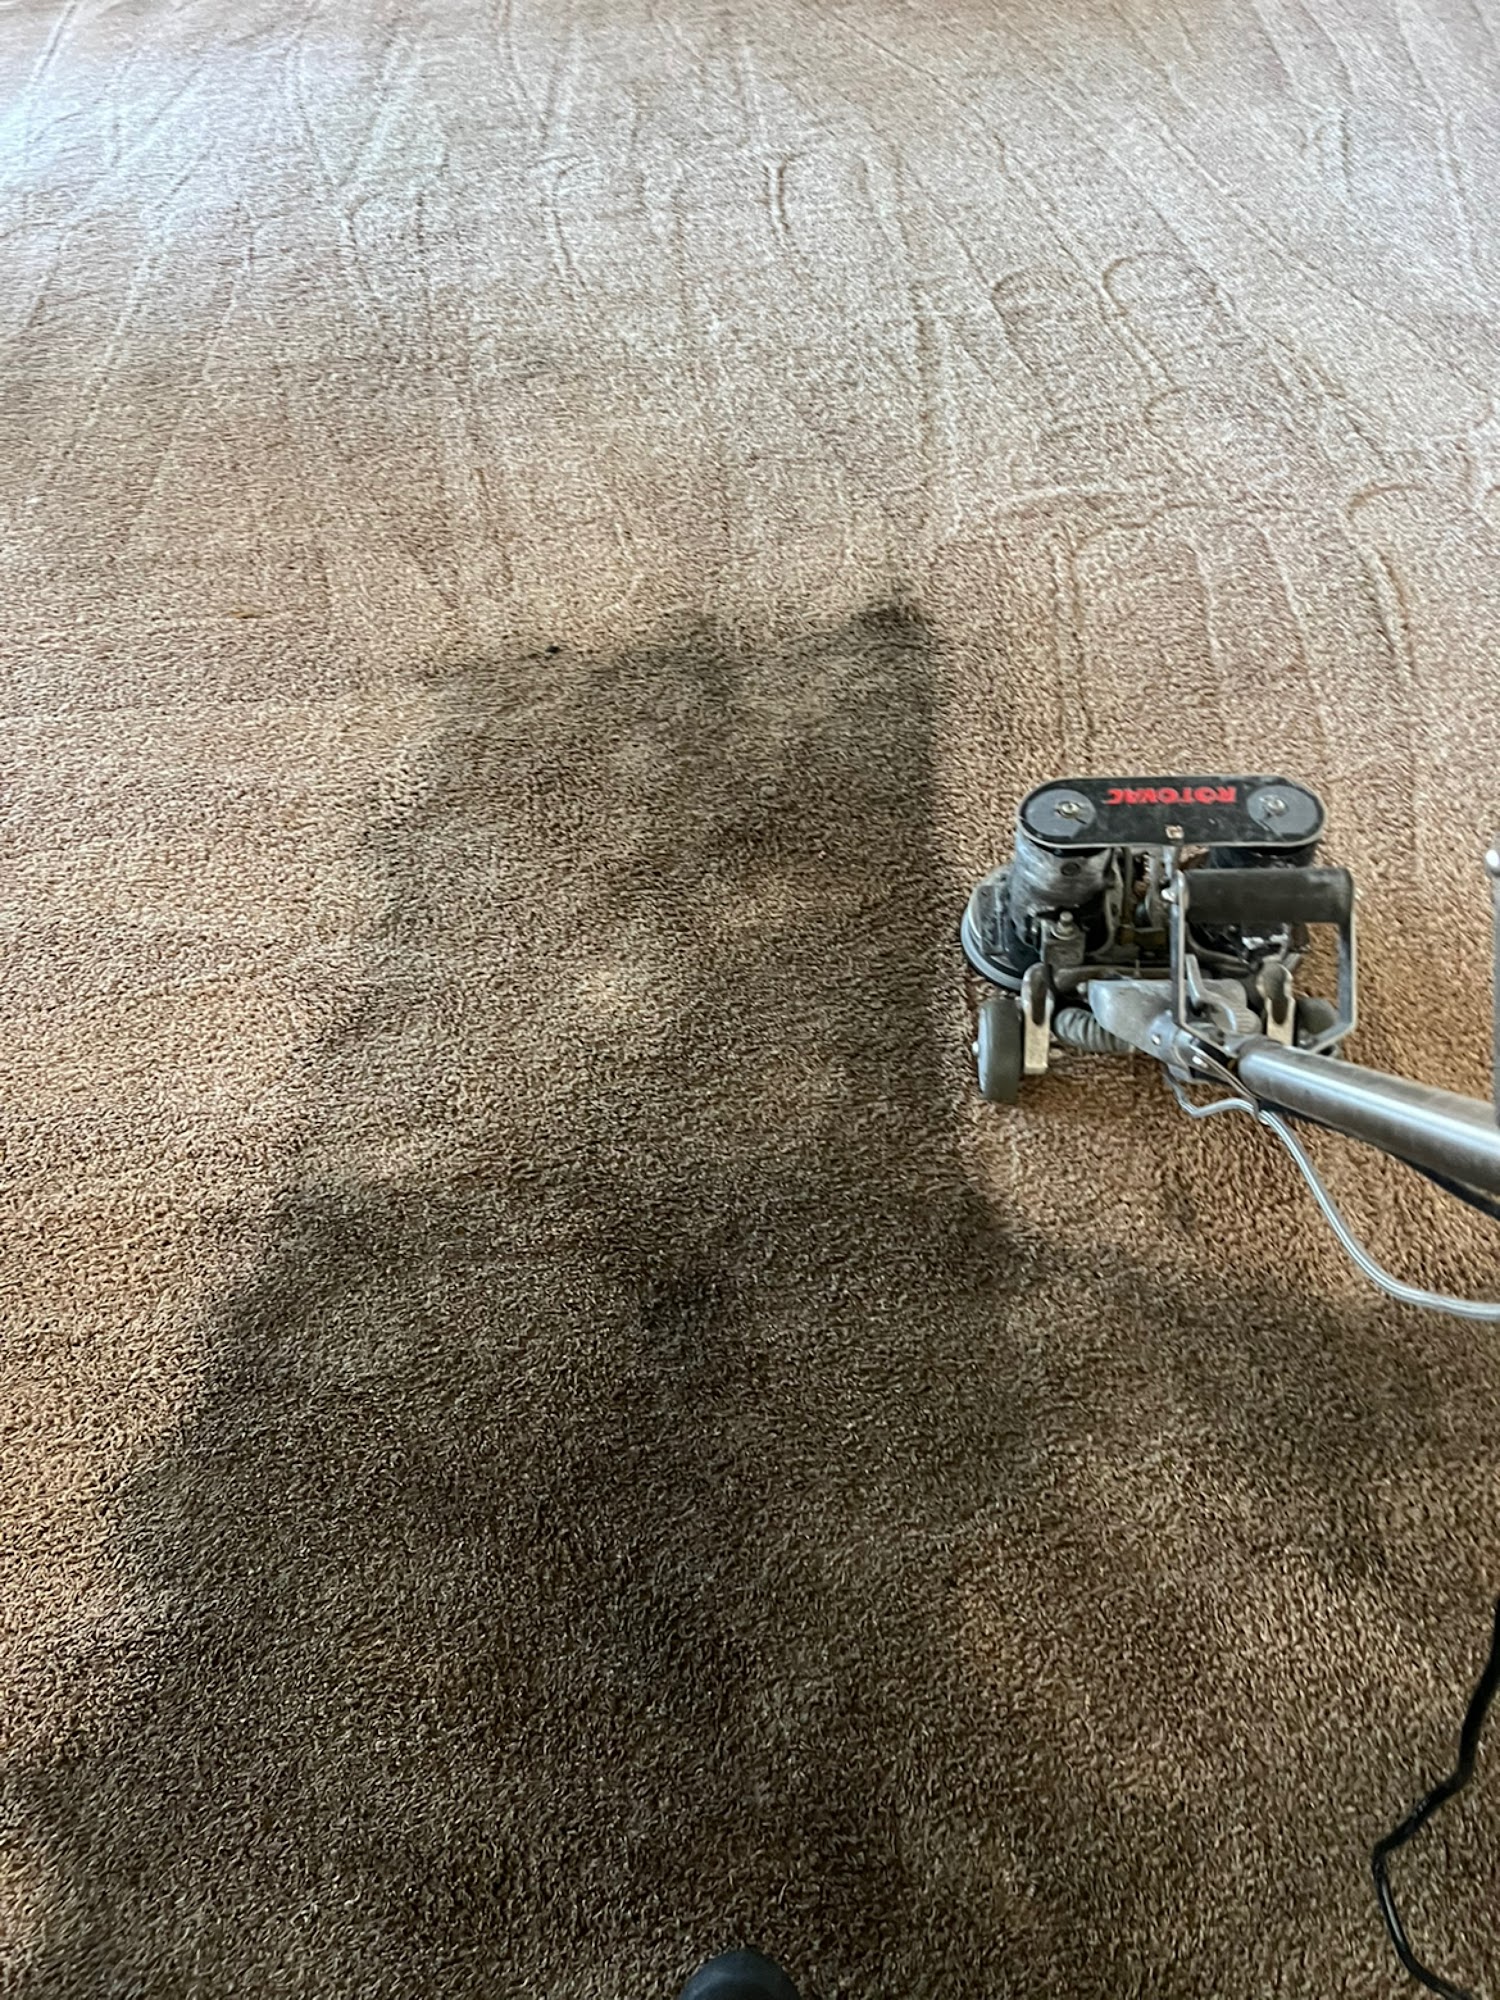 Same Day carpet cleaning, Inc